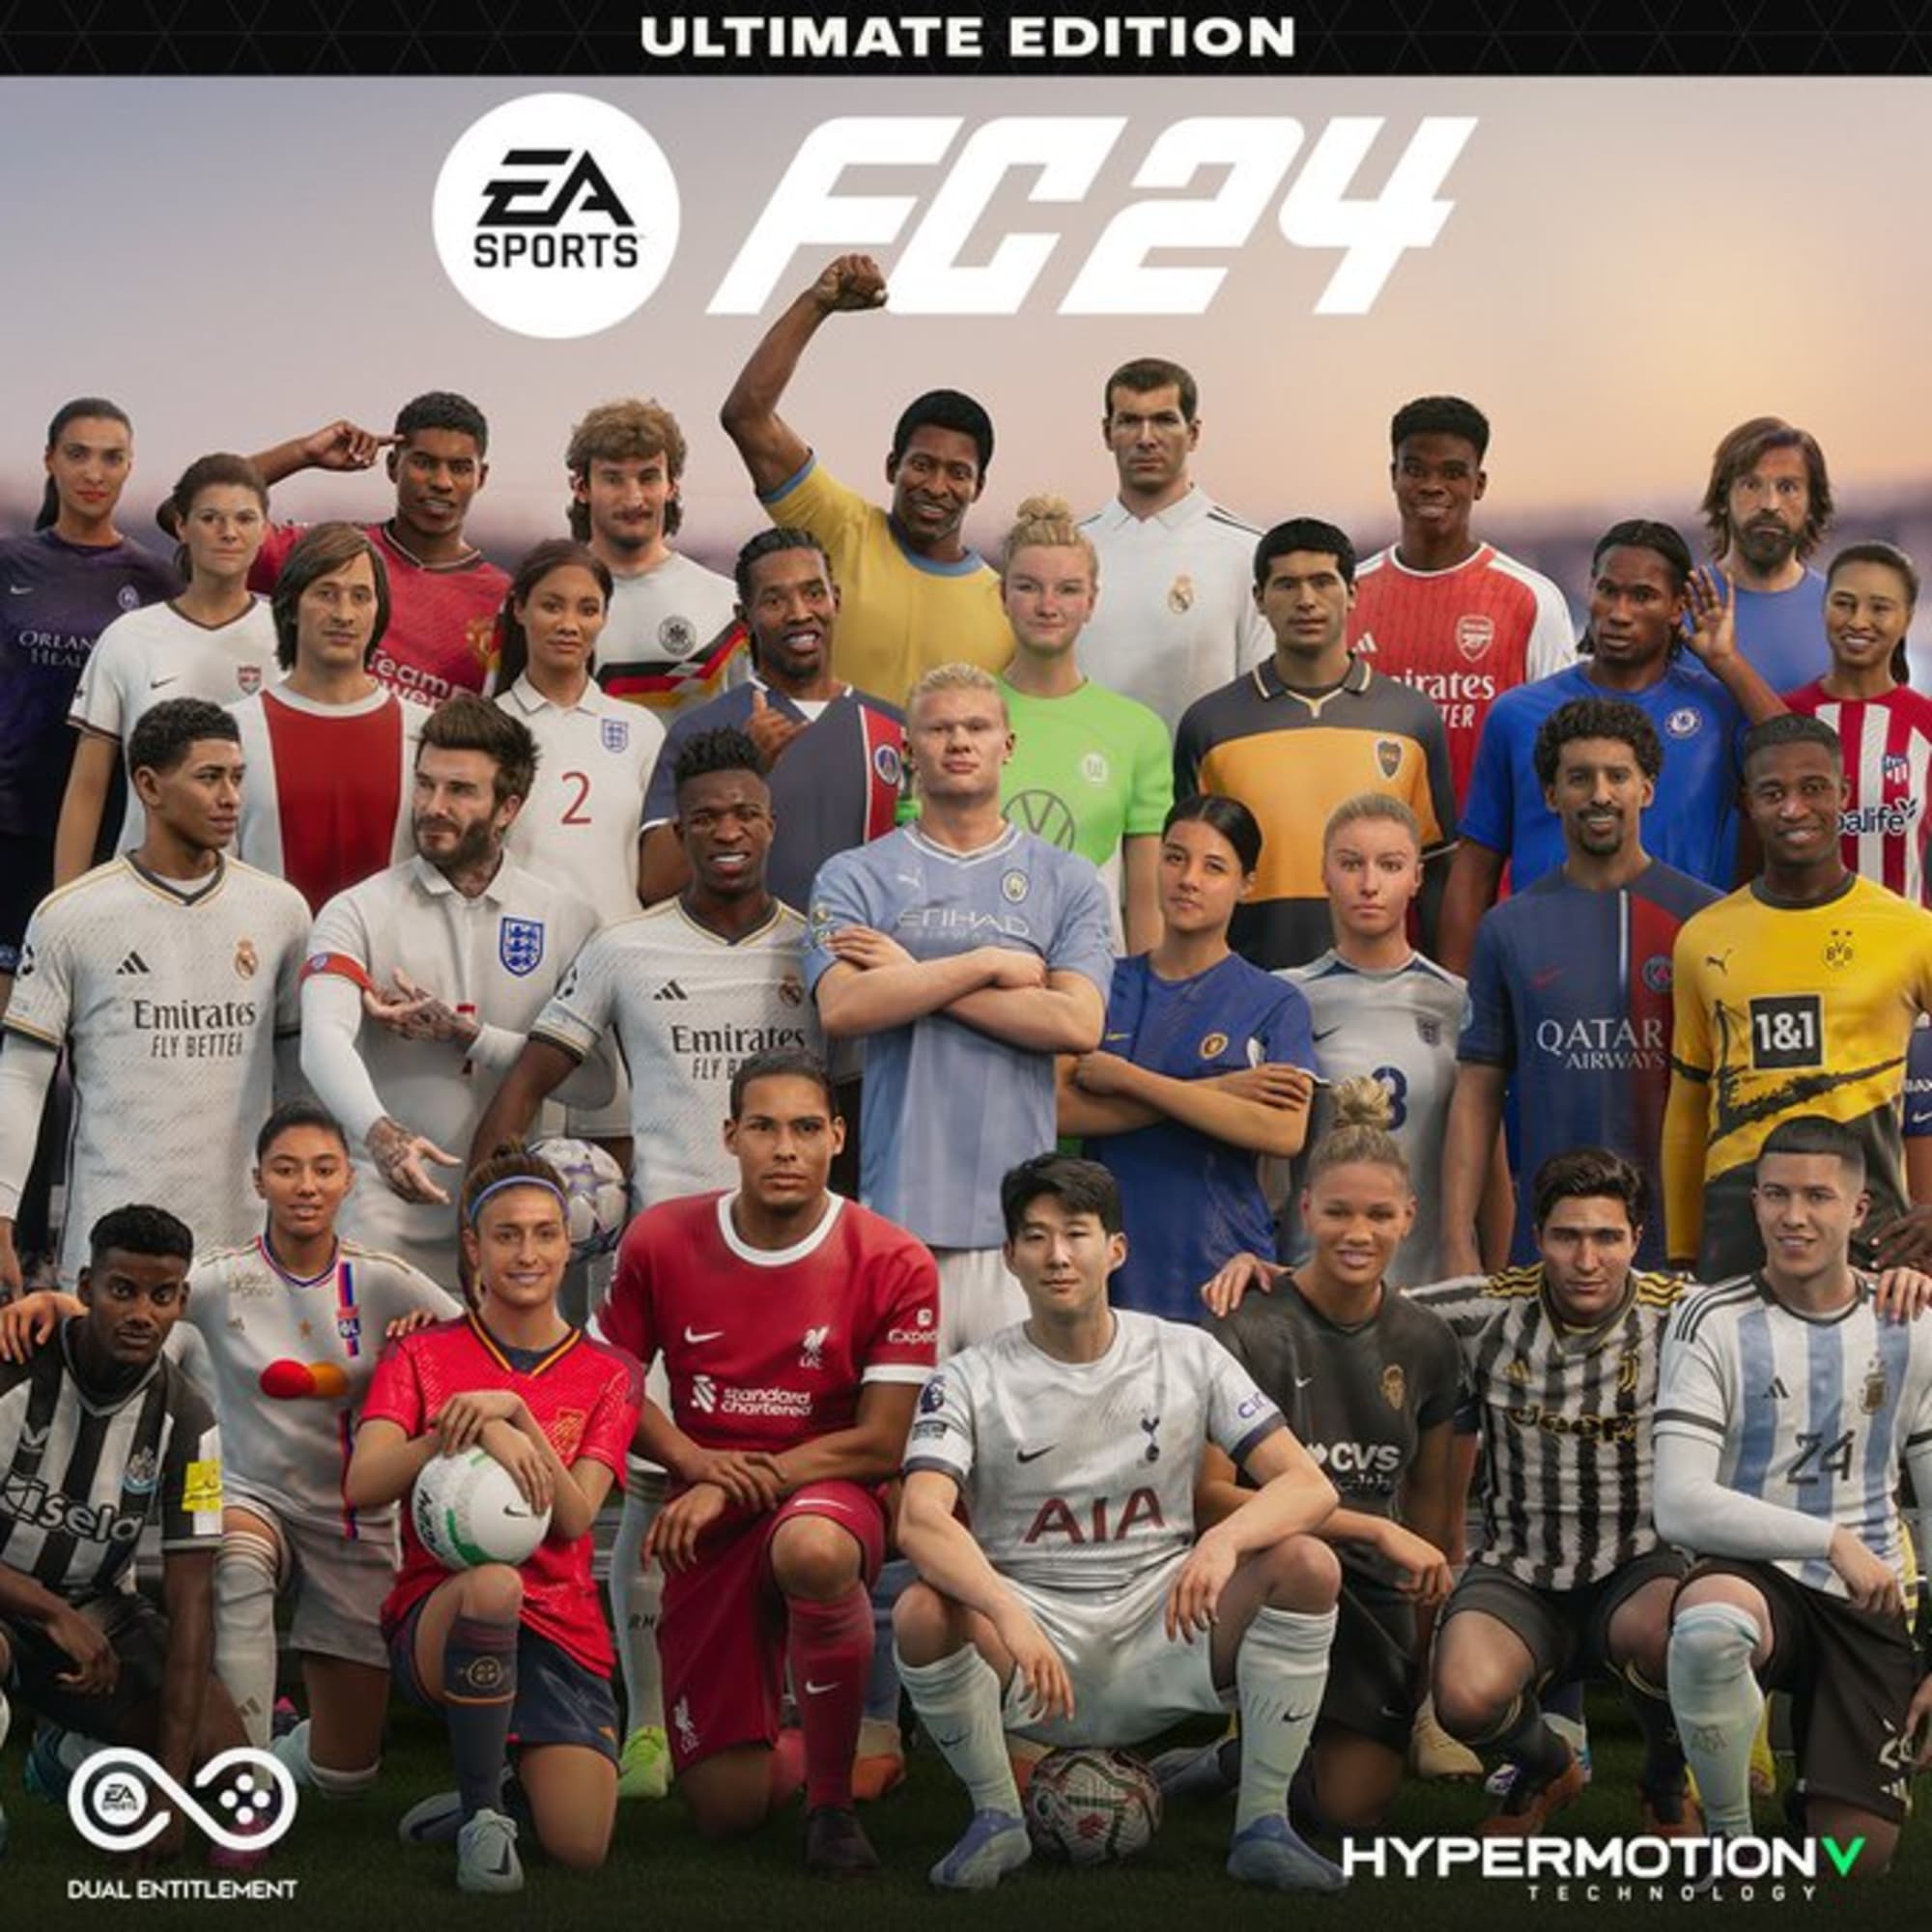 EVERYTHING YOU NEED TO KNOW ABOUT EA FC 24 ON PC! 